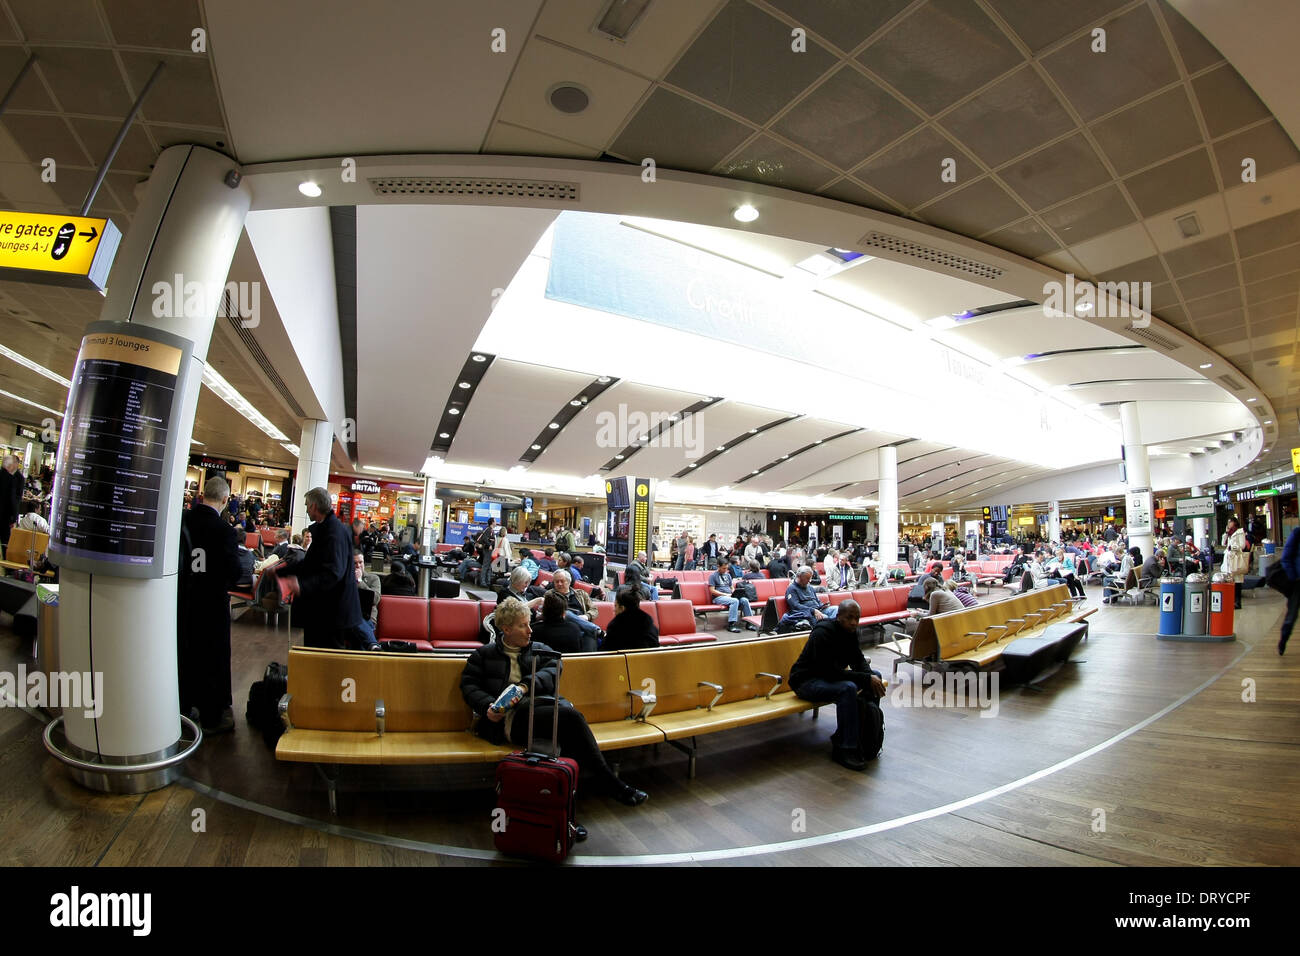 A view of the departure area in Terminal 3 at London Heathrow Airport Stock Photo